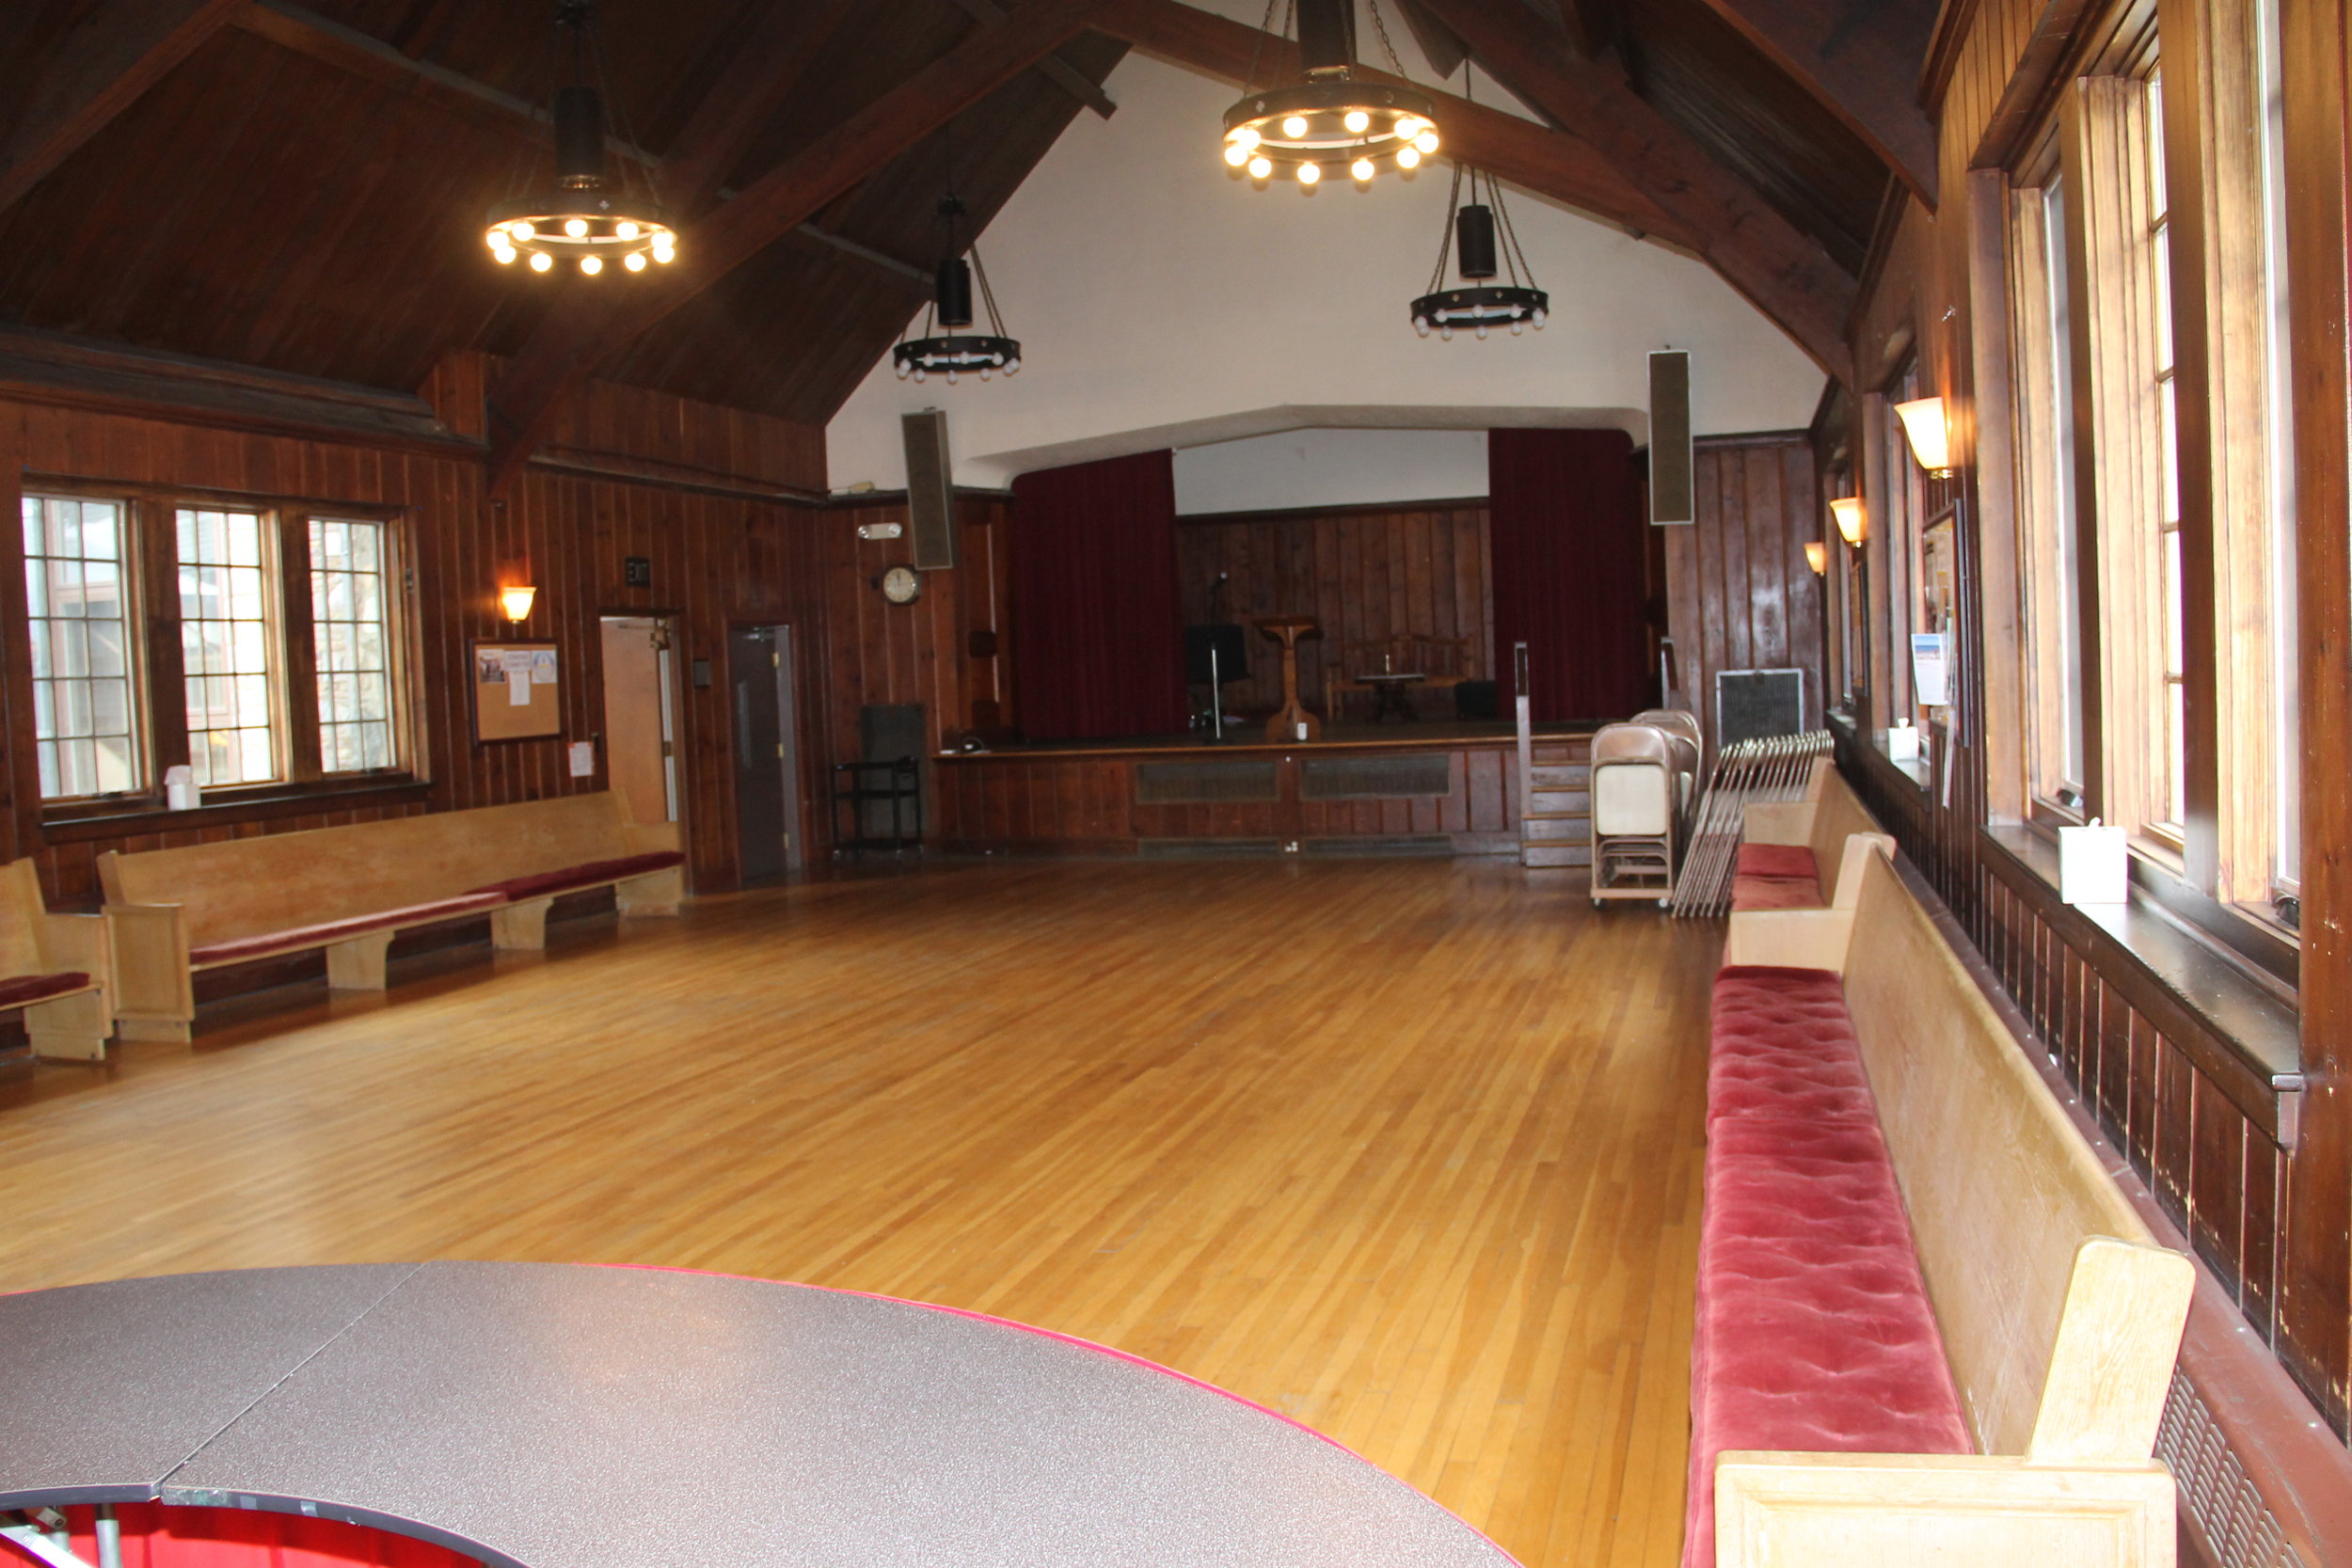  parish hall capacity: 100 $200/ 4 hours, $400/ 8 hours fOR non-members $100/ 4 hours, $200/ 8 hours fOR MEMBERS 